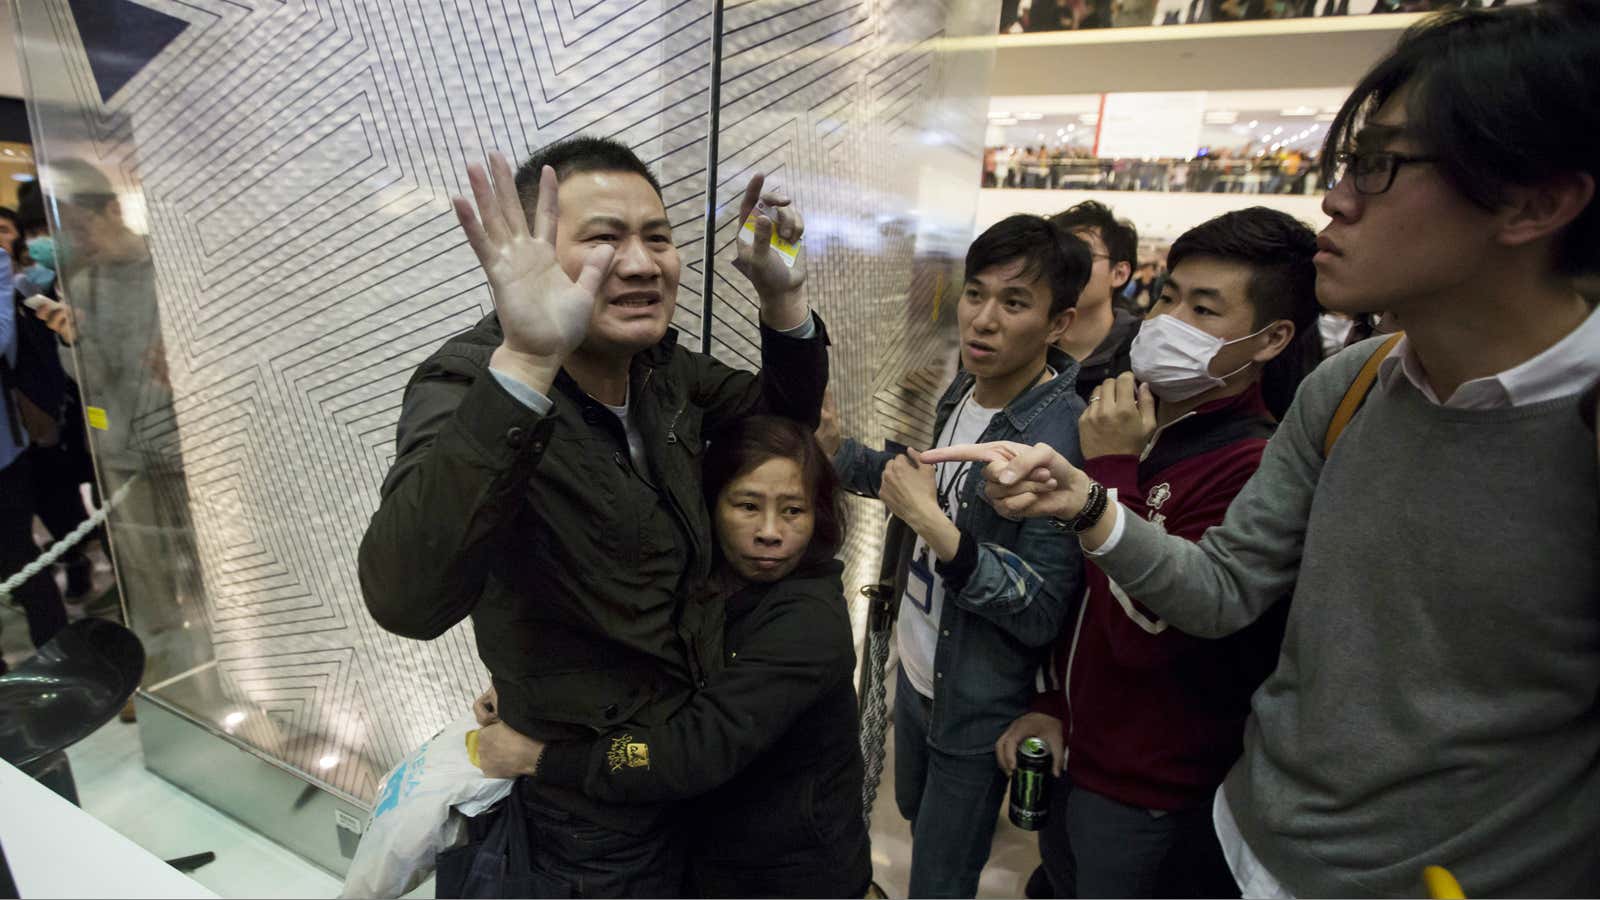 A protester restrains a mainland Chinese traveller (L) who allegedly beat other protesters during a demonstration inside a shopping mall in Hong Kong.